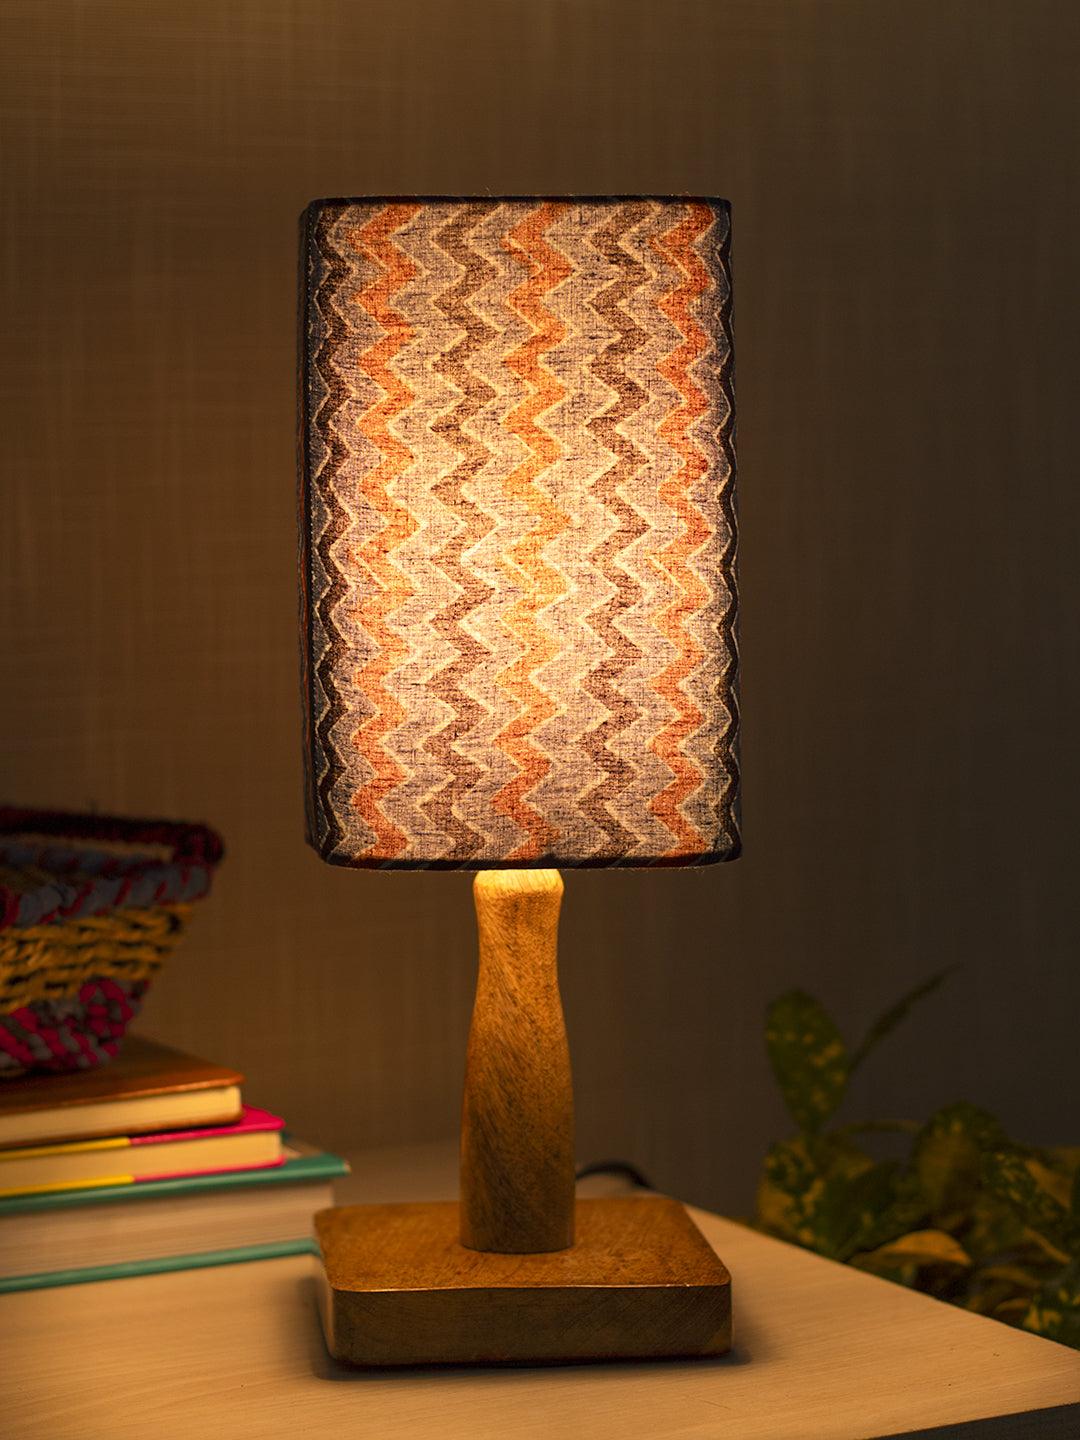 Wooden Table Lamp With Zig Zag Print Shade - MARKET 99